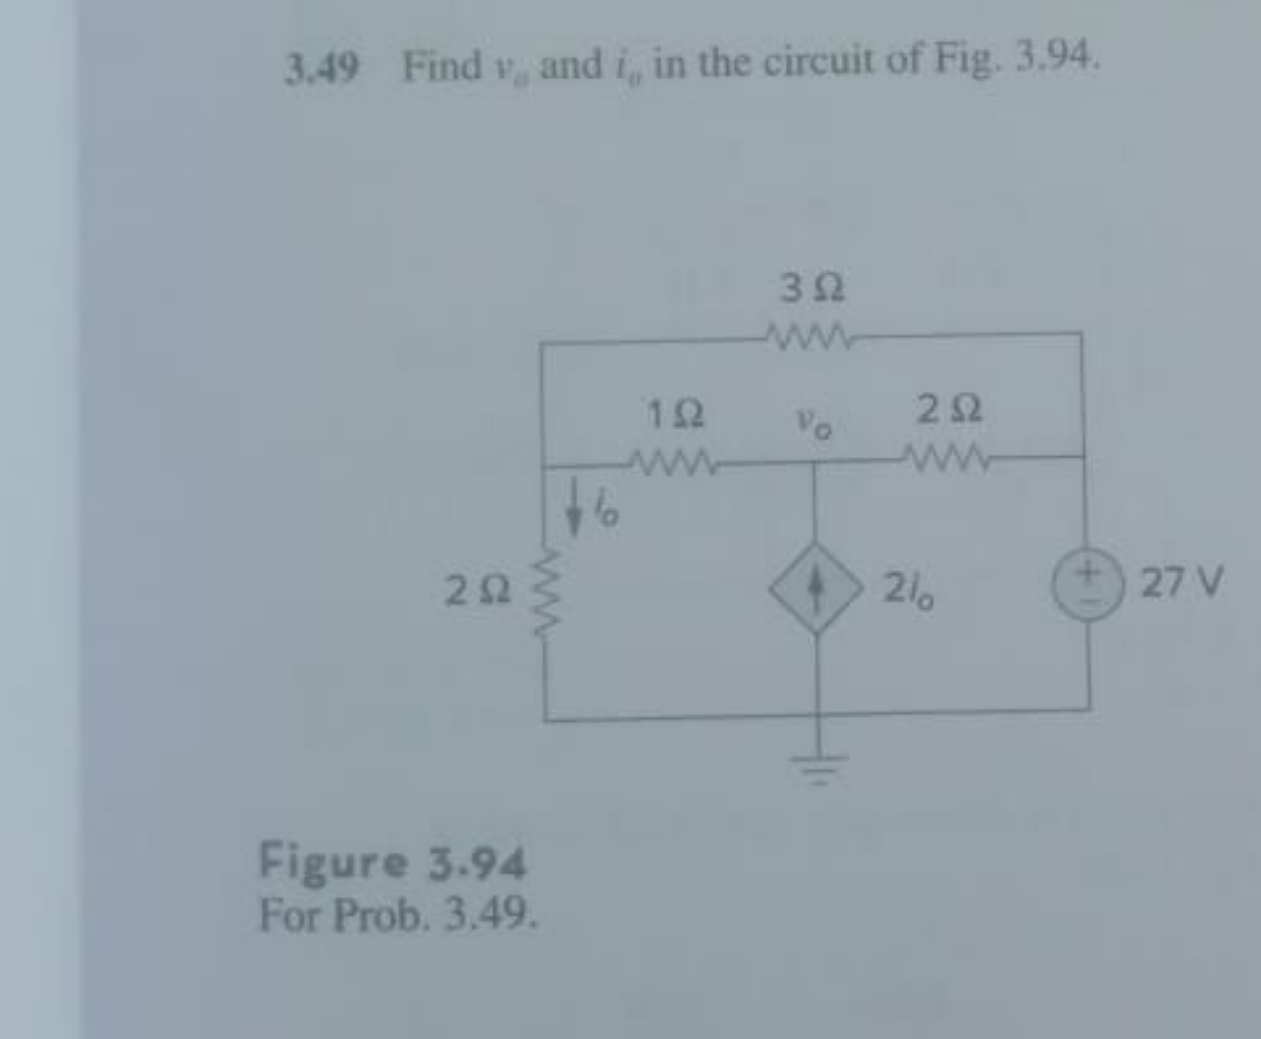 3.49 Find ve​ and ie​ in the circuit of Fig. 3.94.
Figure 3.94
For Pro